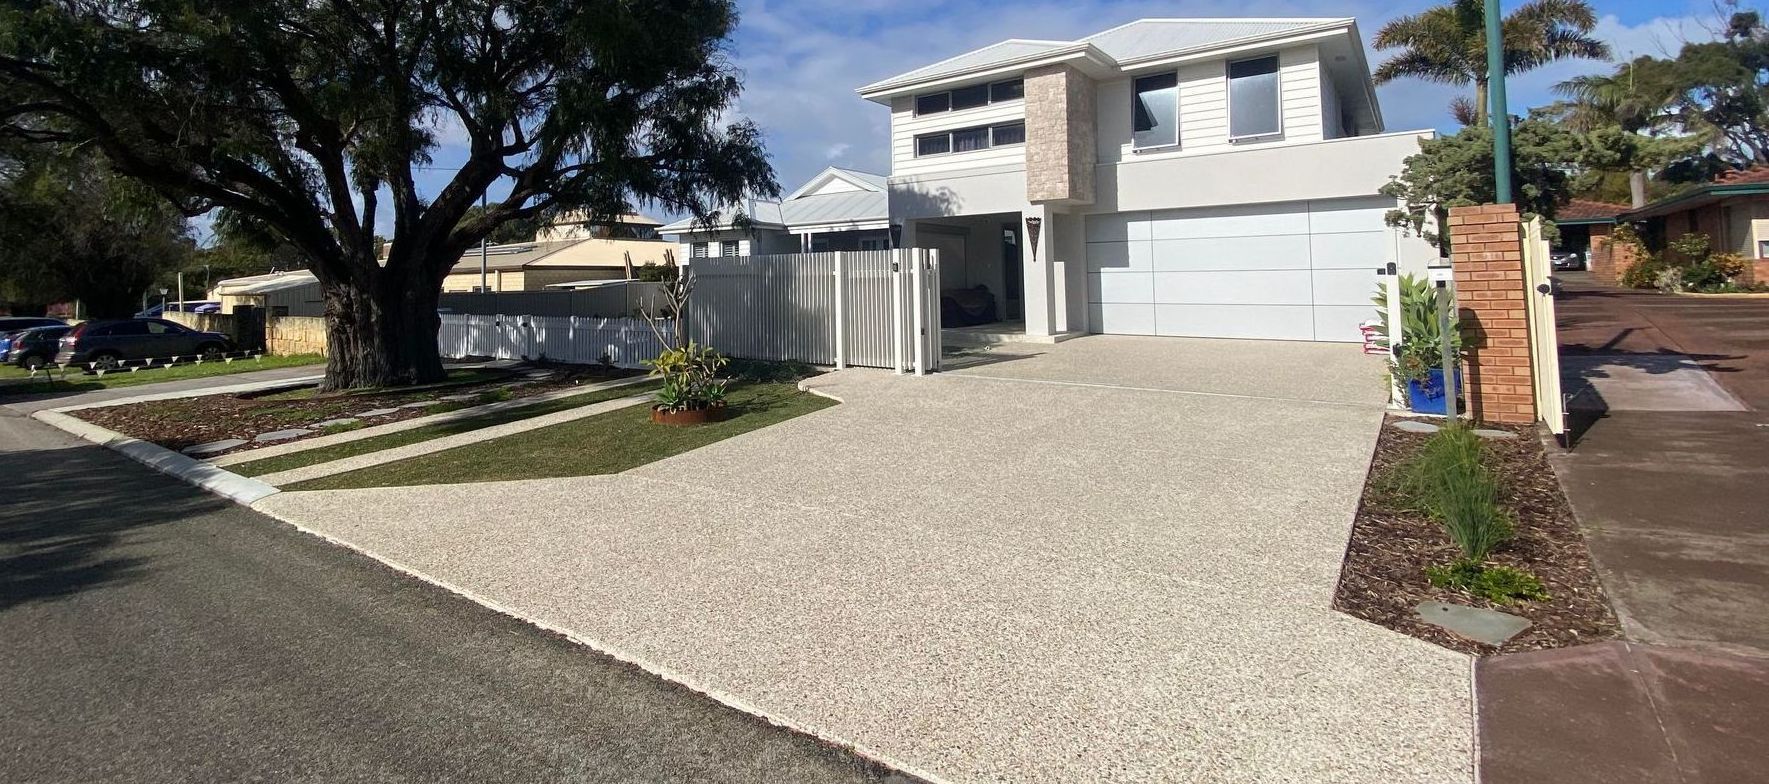 Exposed aggregate driveway services